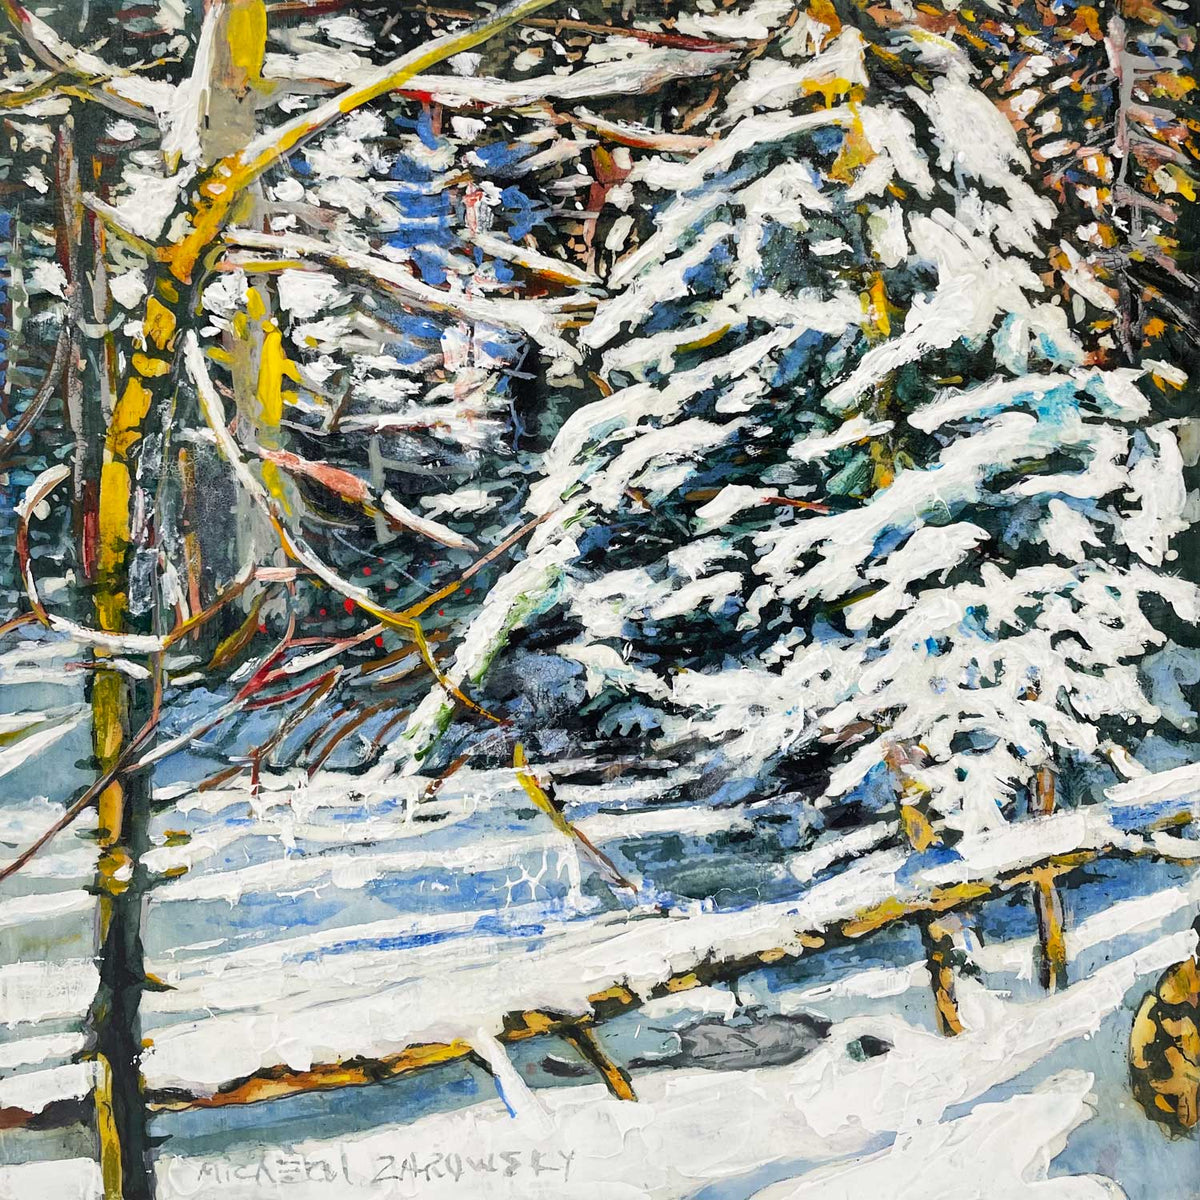 Micheal Zarowsky - Snow Covered Pine At the Edge of A Frozen Lake, 12" x 12"